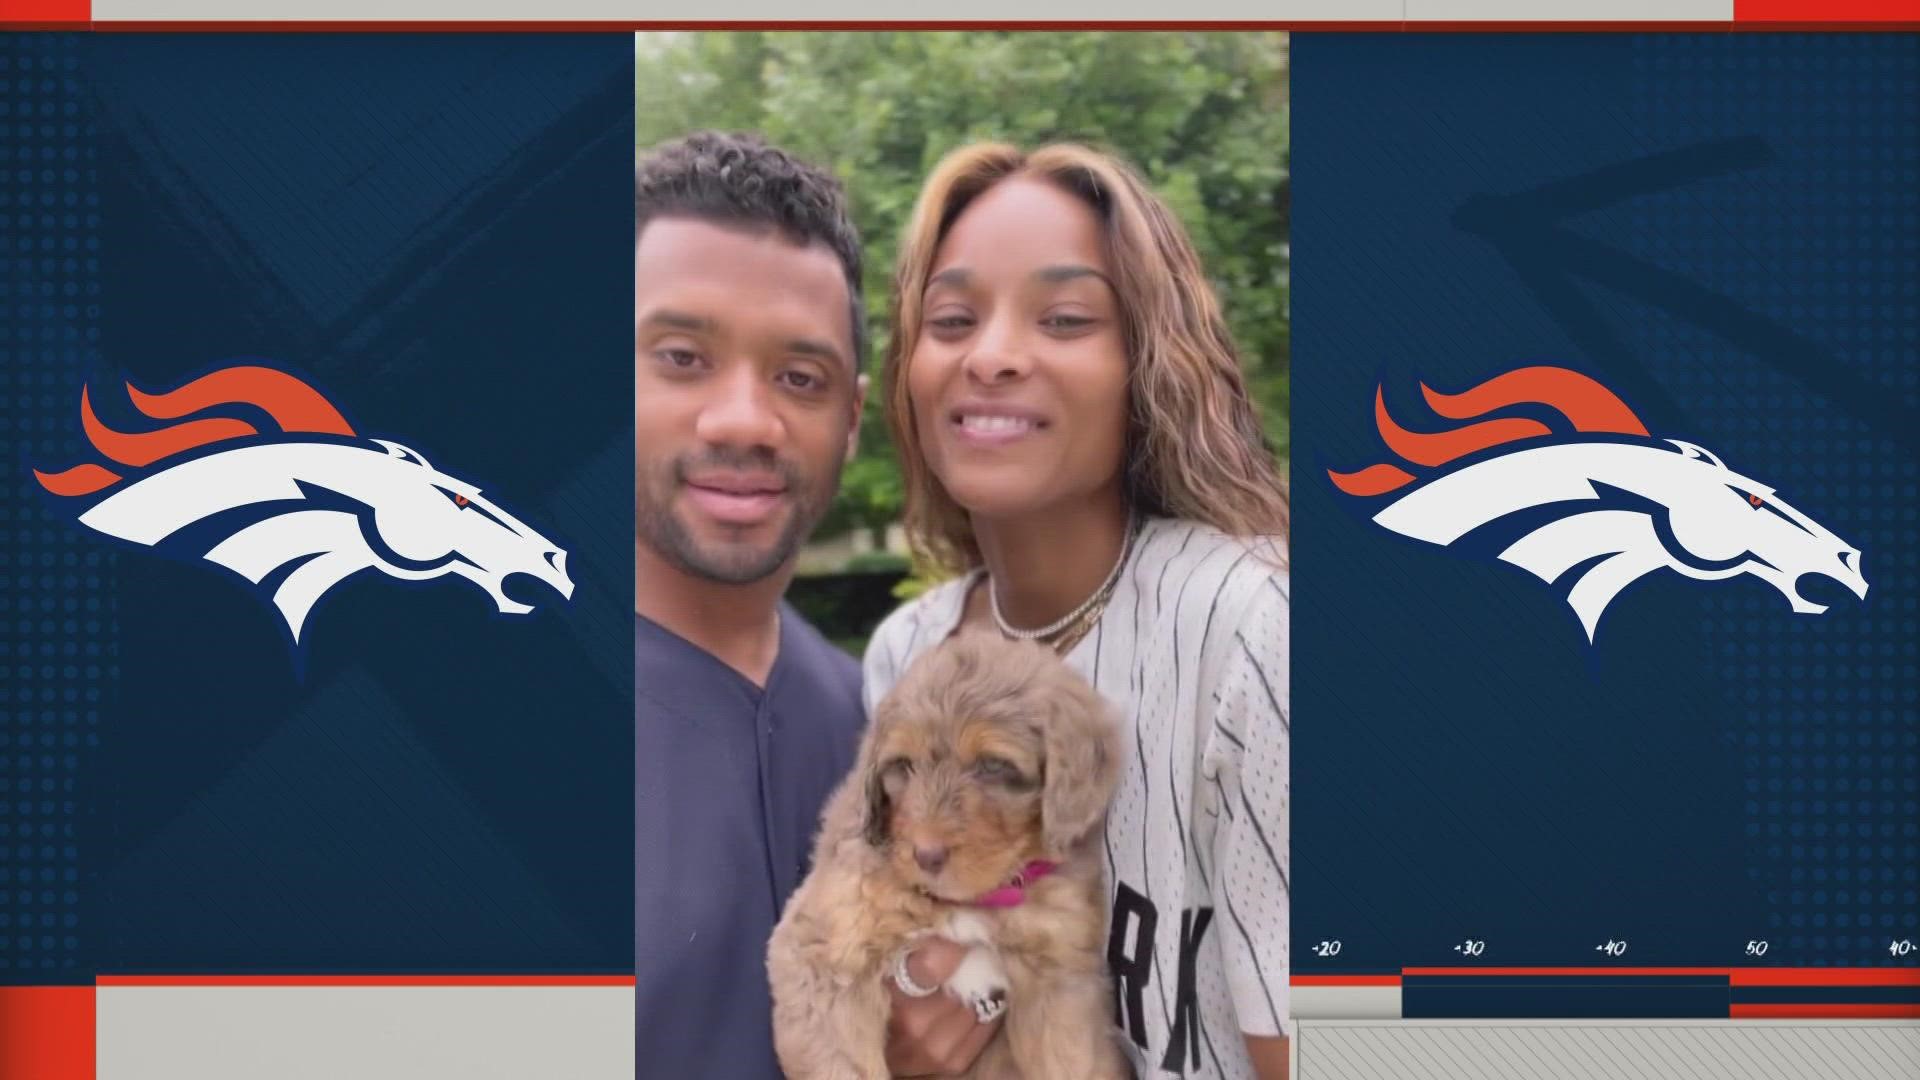 The adorable puppy was a gift to Ciara from her husband and the Broncos quarterback Russell Wilson on Mother's Day.